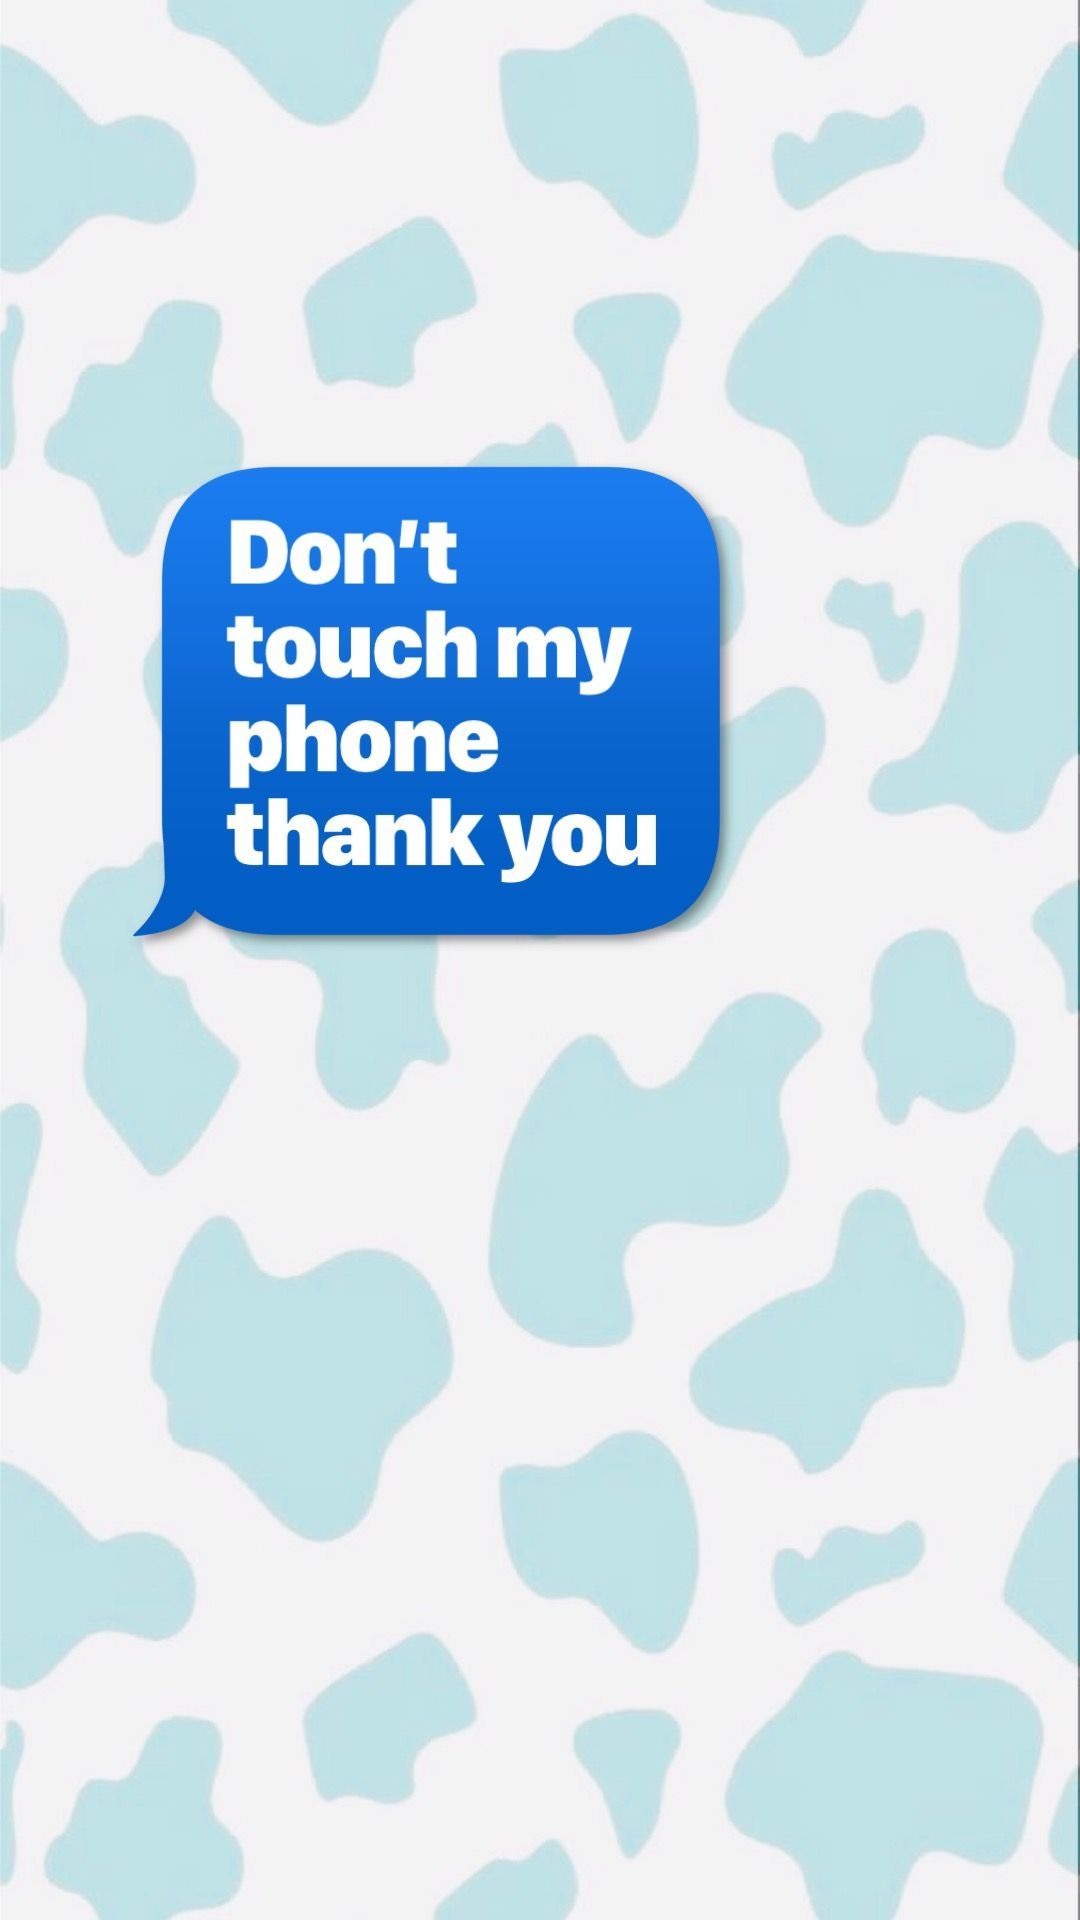 Don't touch my phone wallpaper - Don't touch my phone